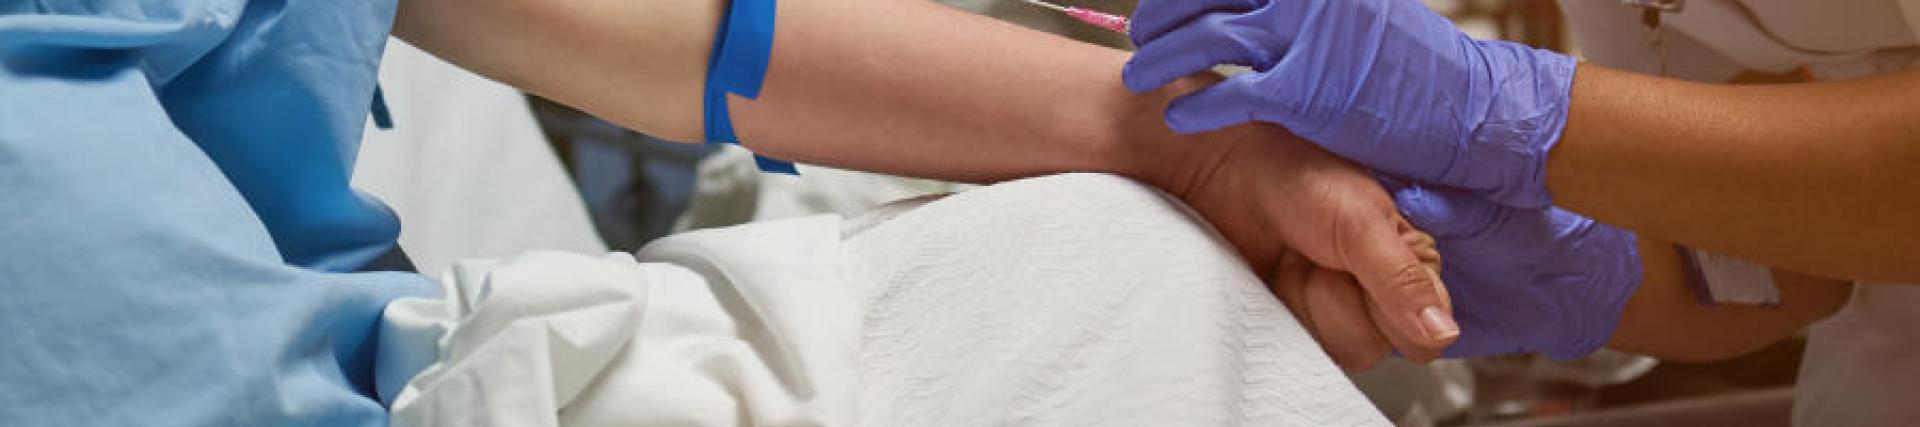 A close up view of a nurse setting up a peripheral venous catheter